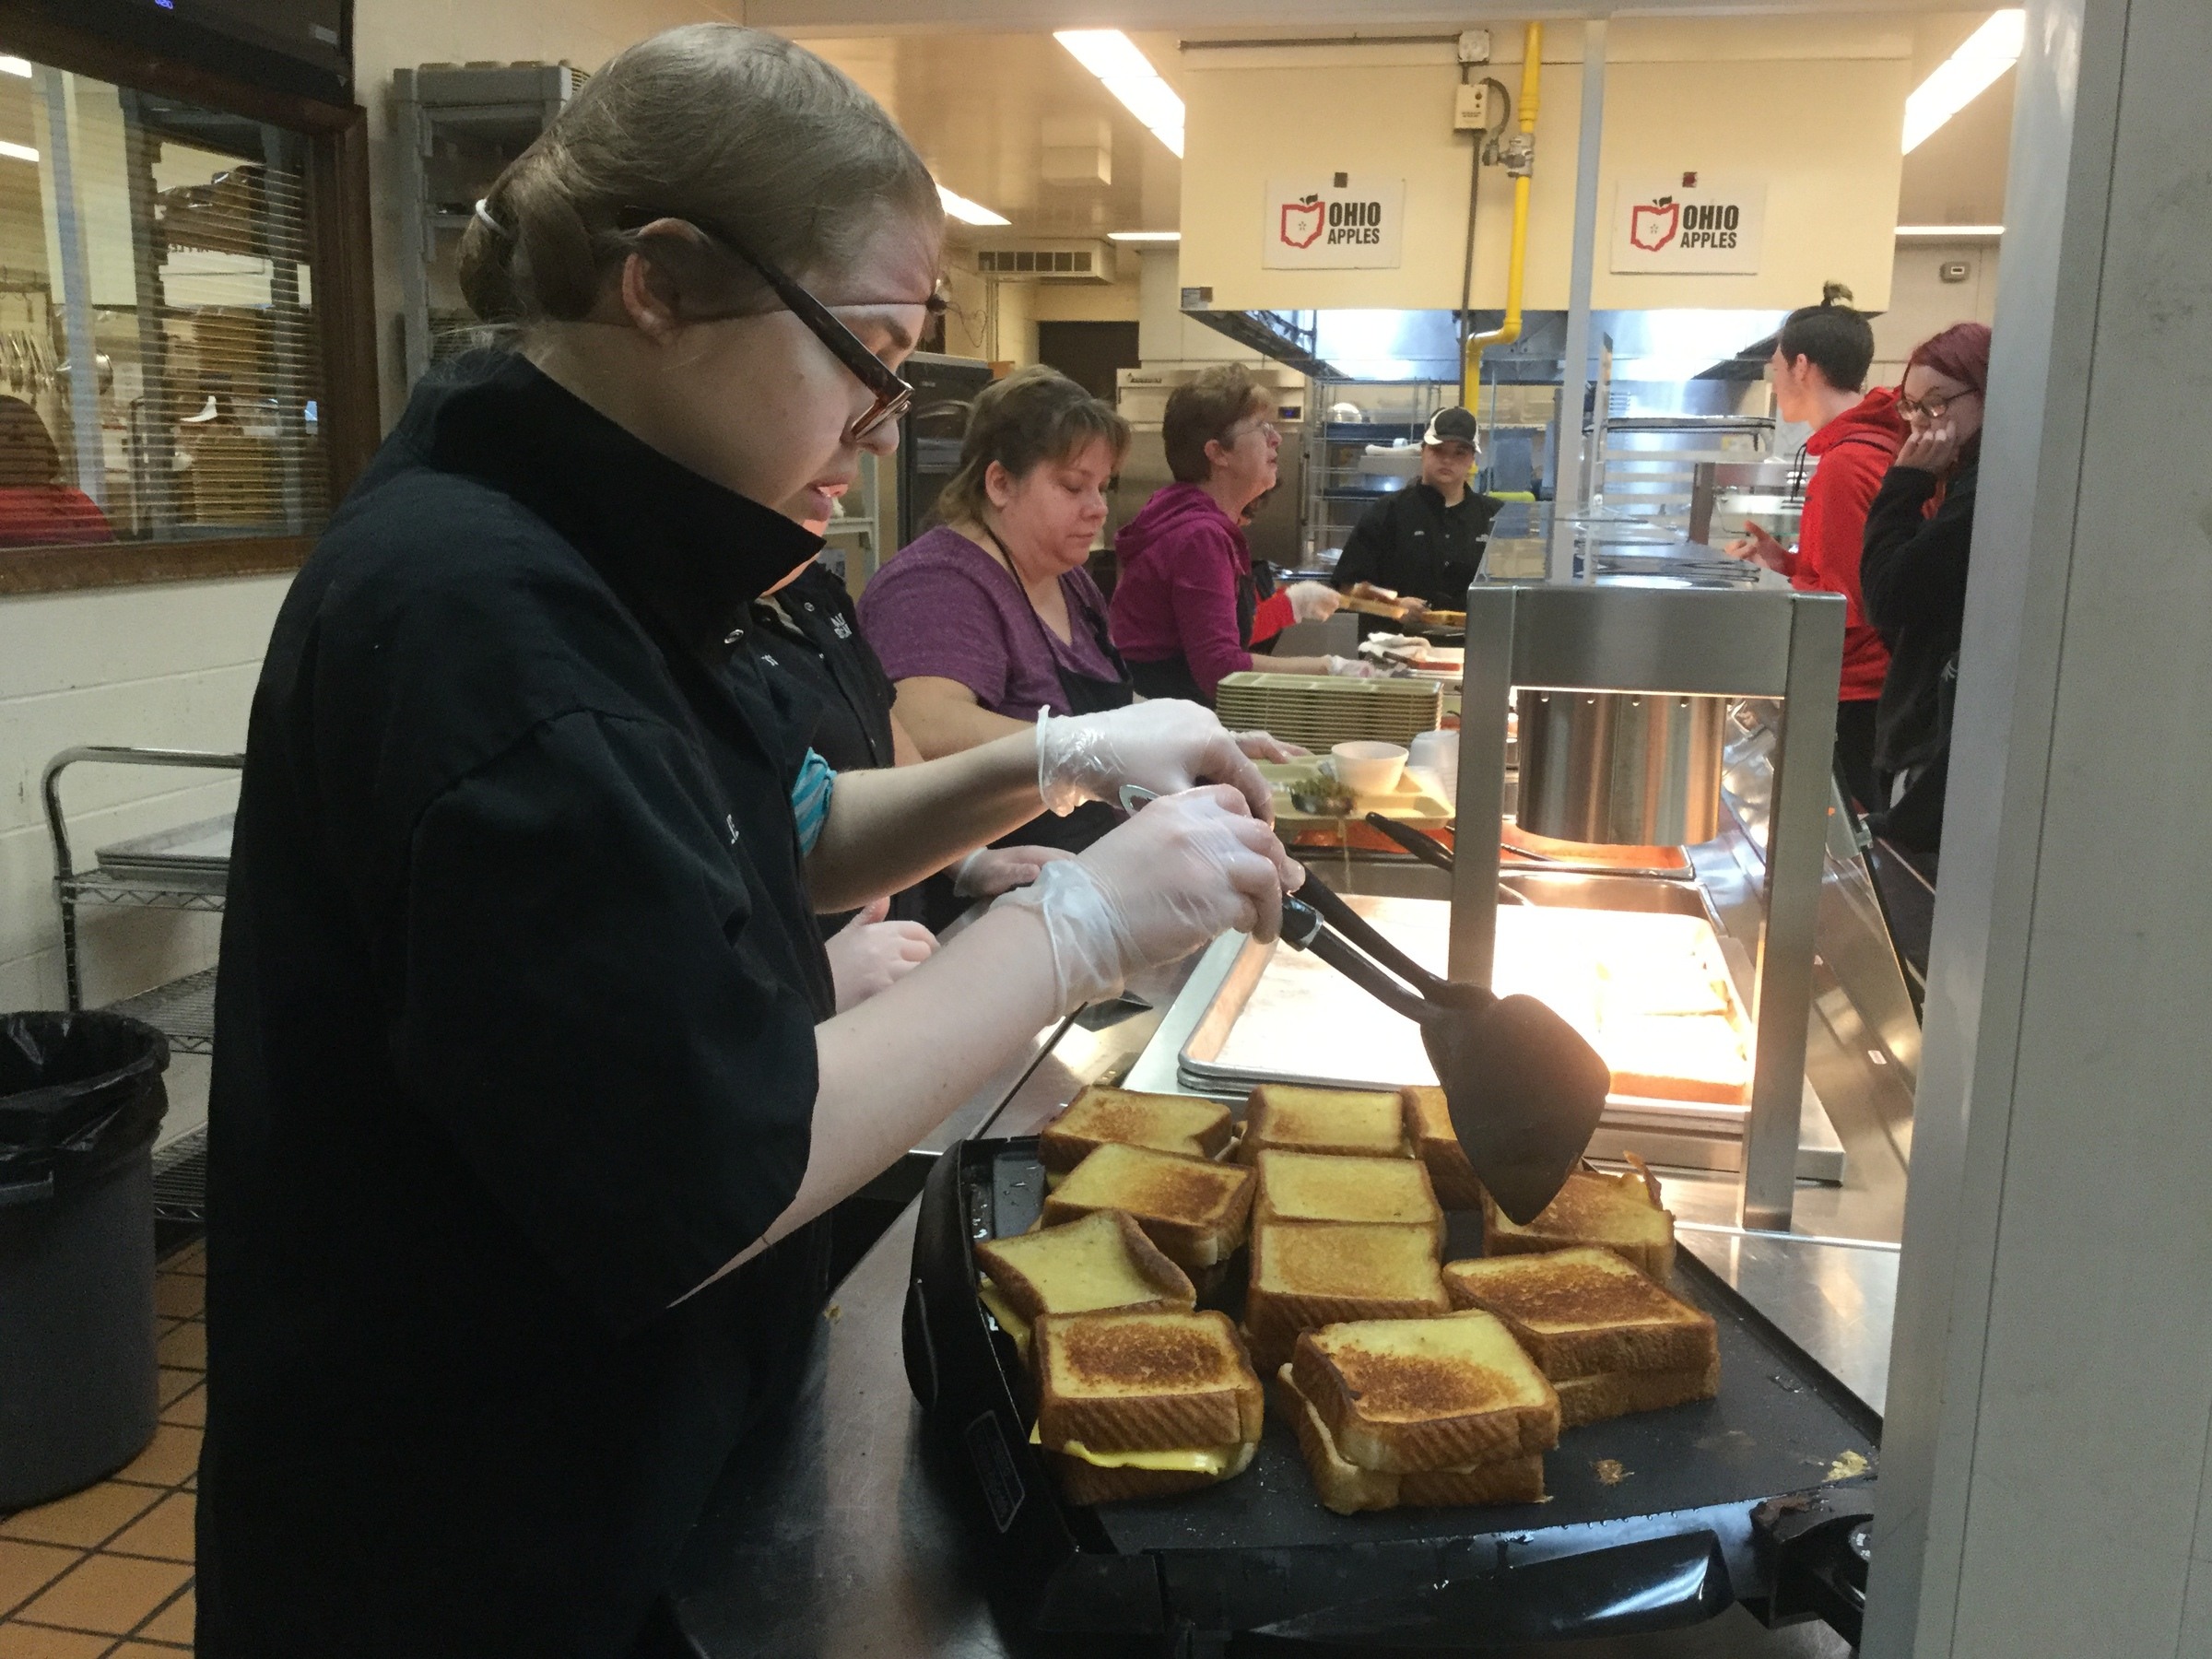 Students and cafe workers Serving in Cafeteria